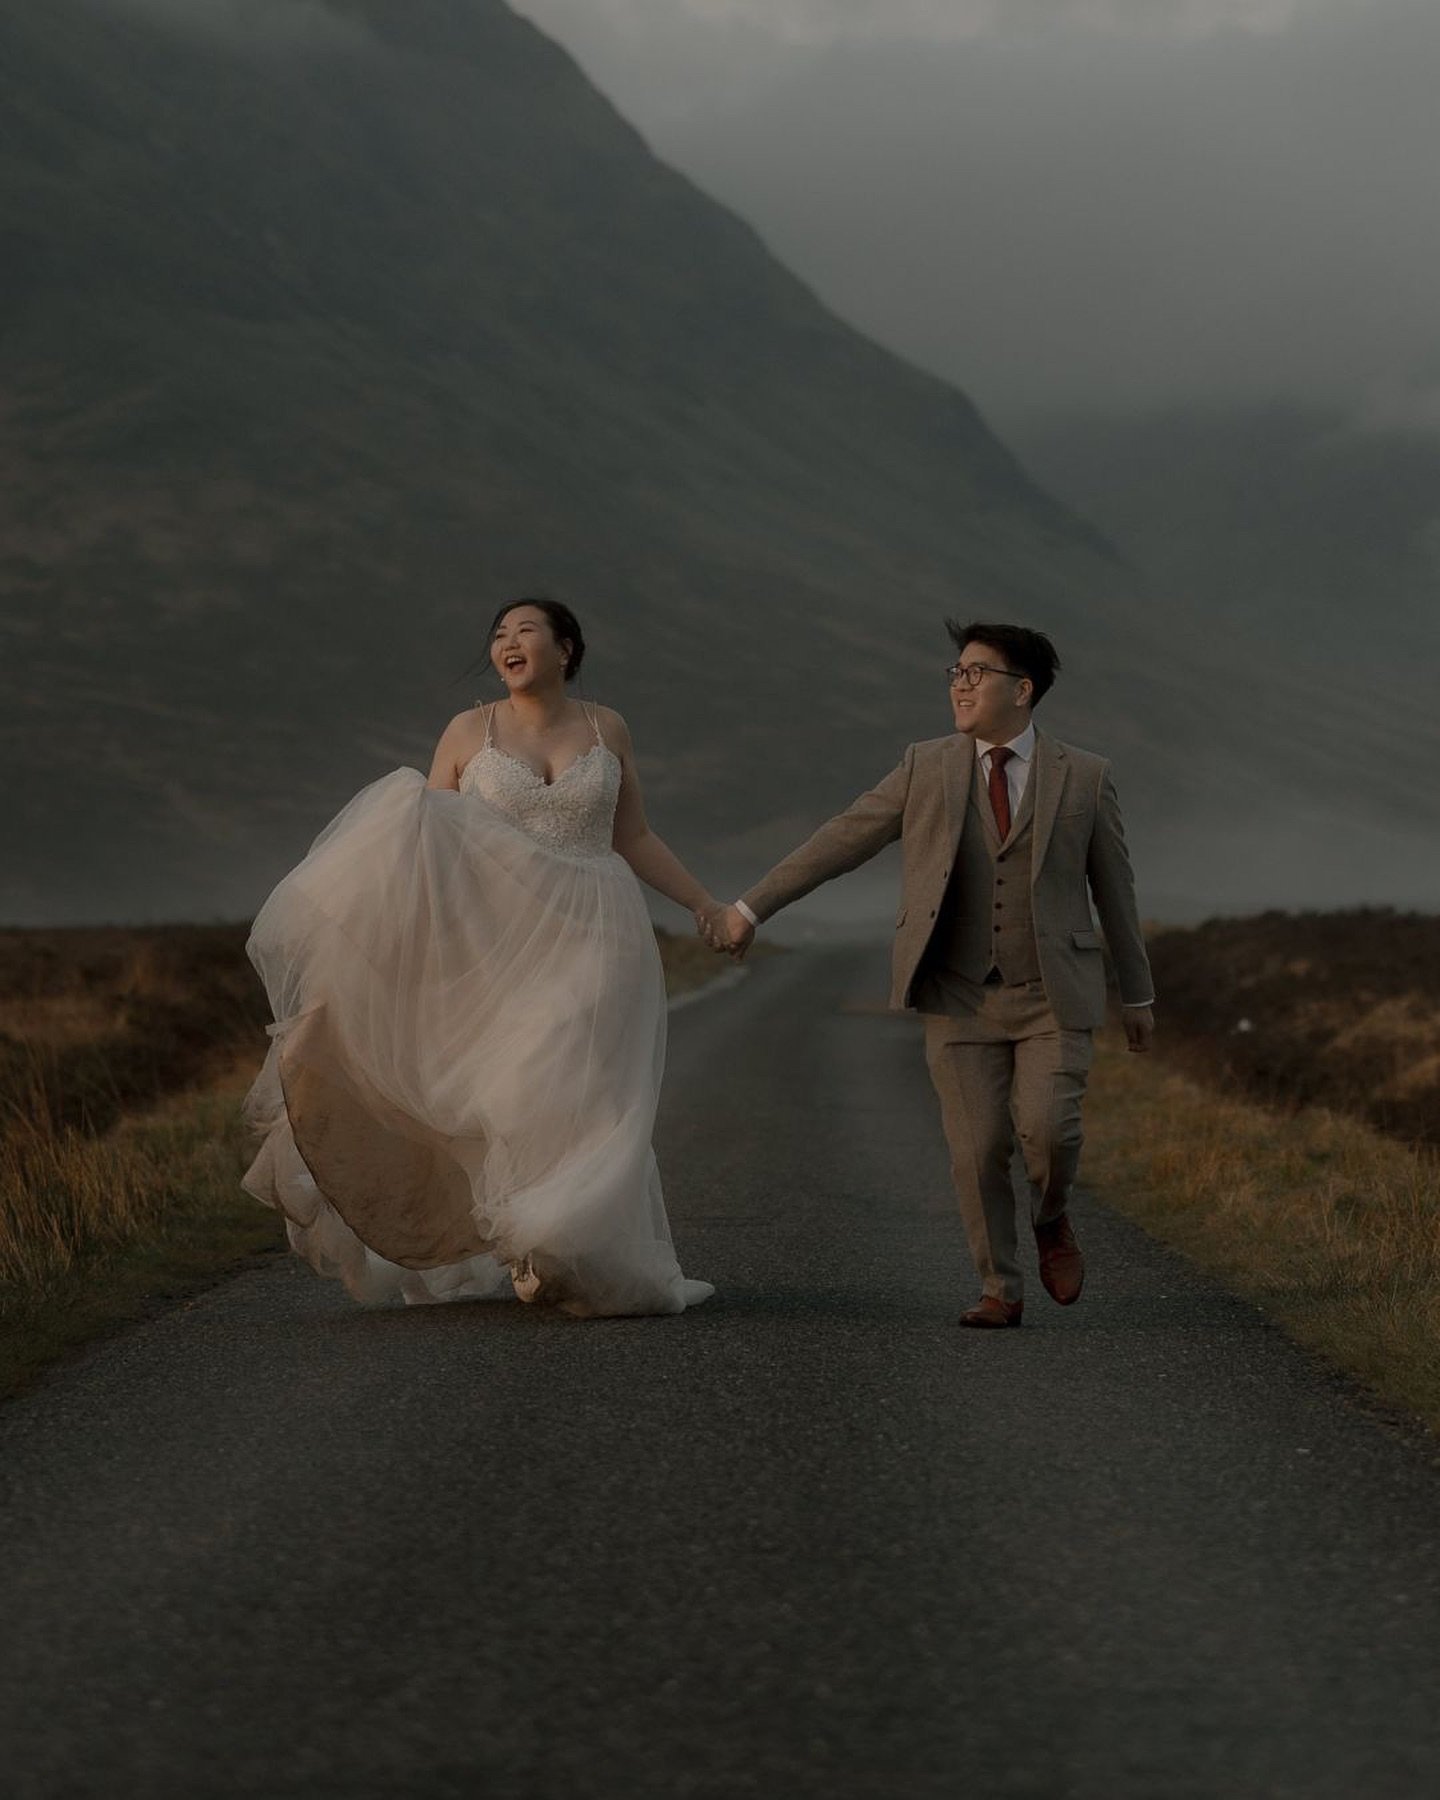 This sunrise in Glencoe was very special! It happened just a few days after G&amp;A held their celebrations at @netherbyres which we&rsquo;ll be sharing much more of soon..

It really felt like all the magic of Scotland came out to celebrate these tw